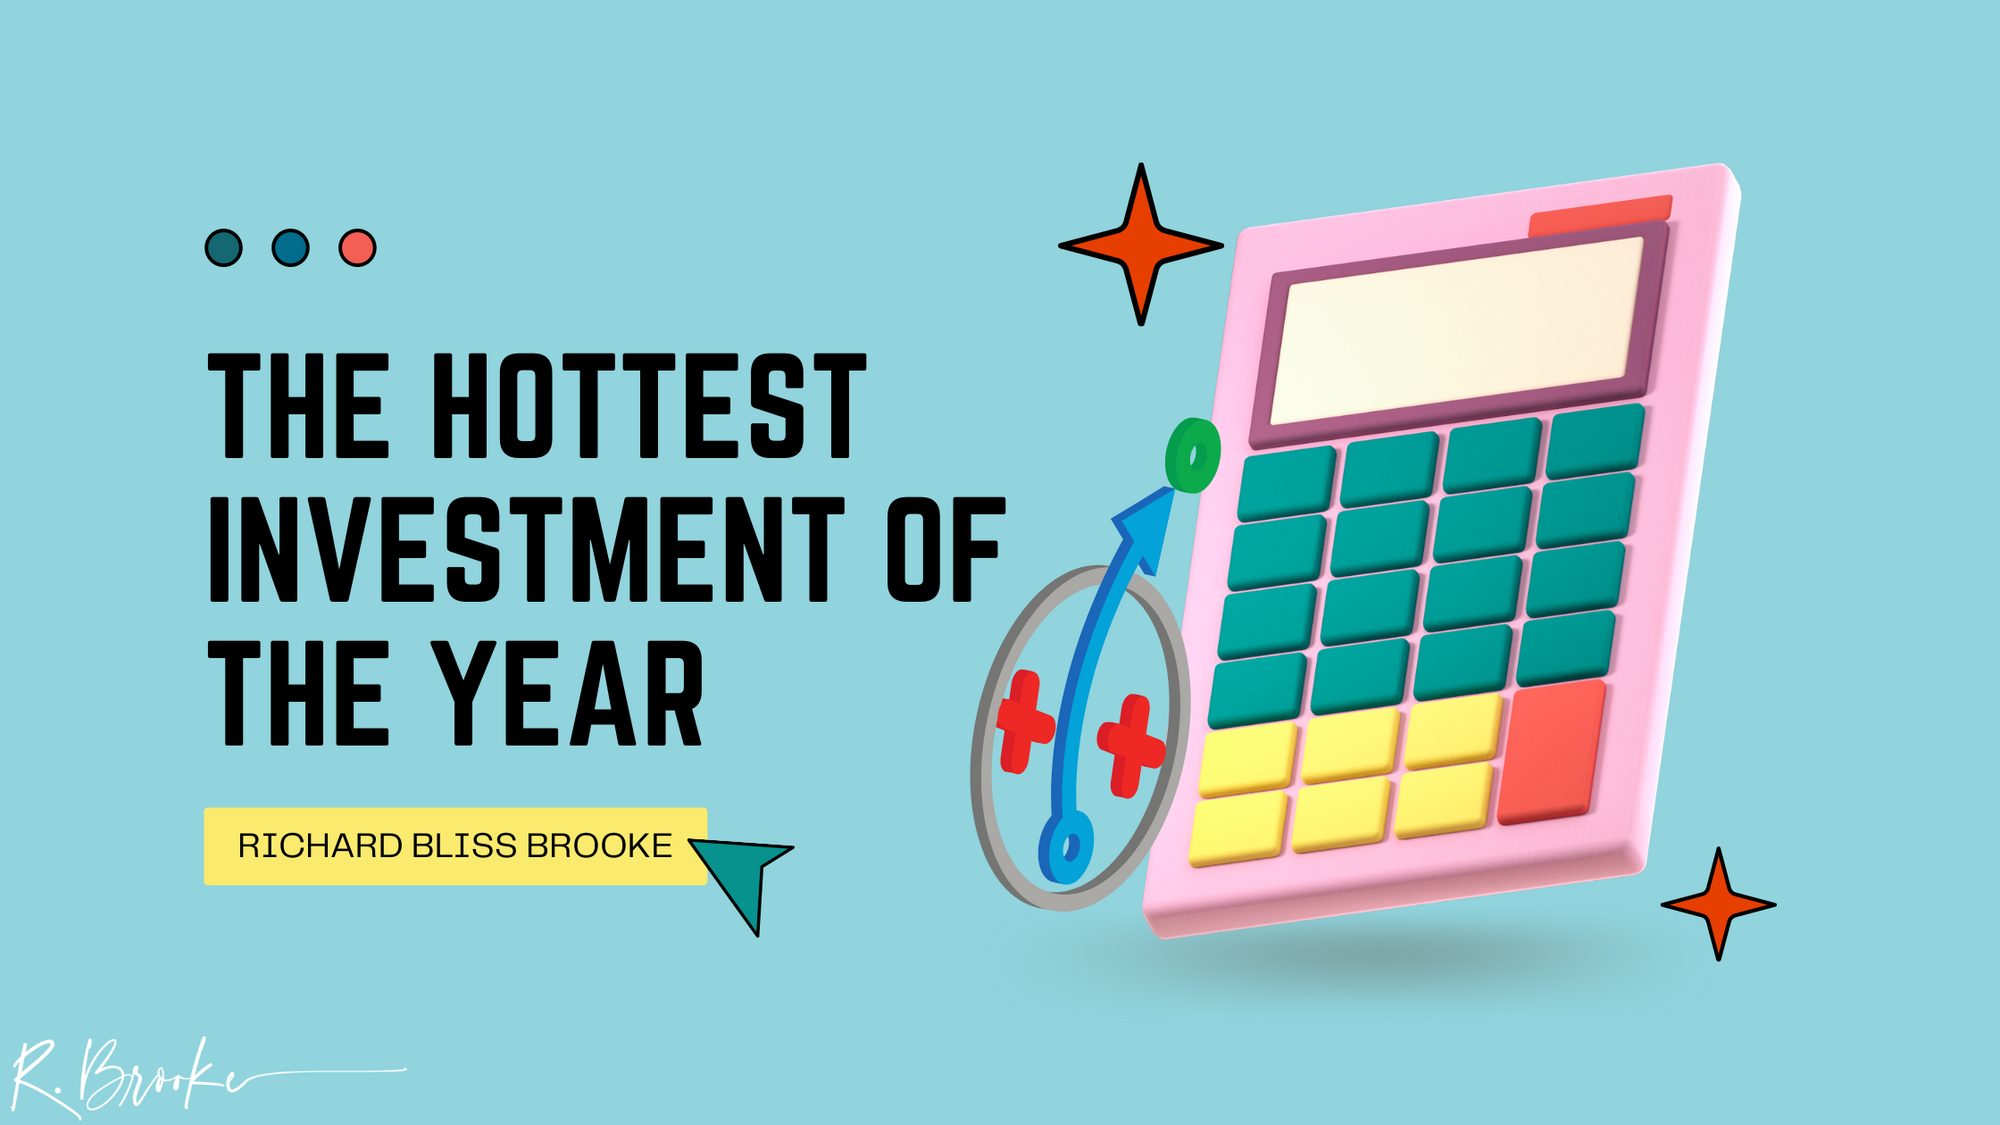 The Hottest Investment of the Year